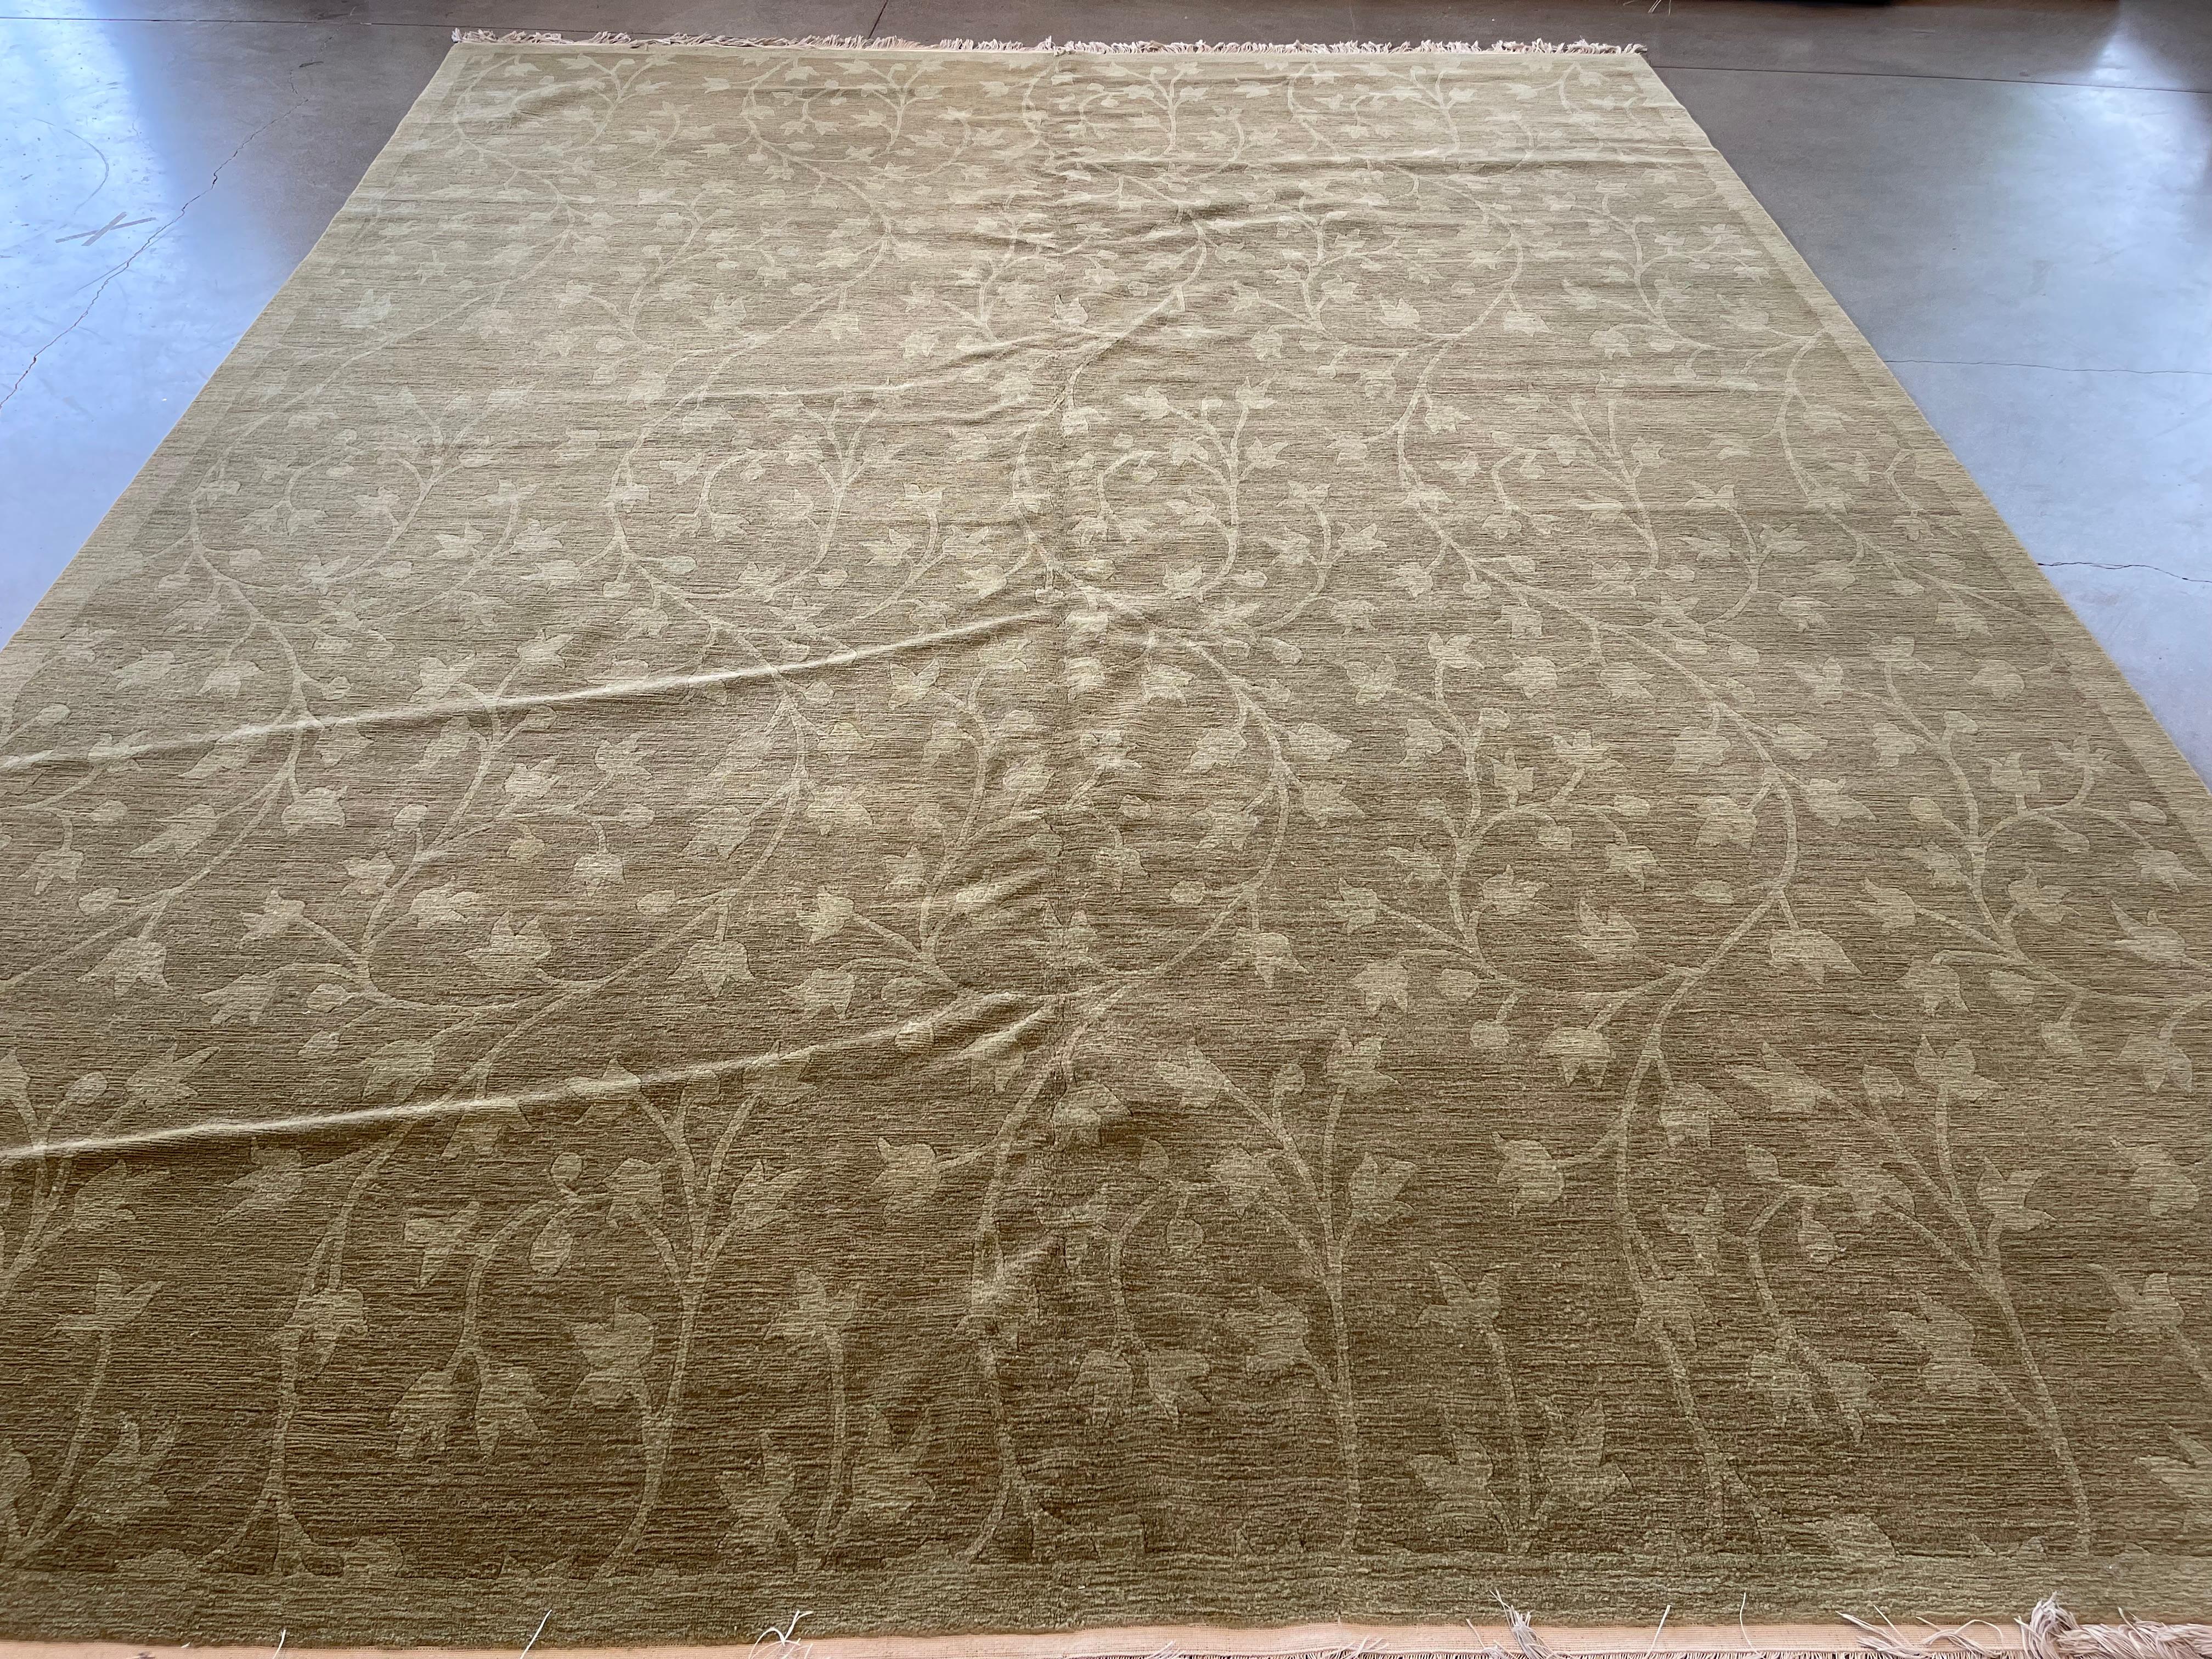 Do you love tulips? Then there is a good chance this rug will fit perfectly in your space. This olive green tulip and vines all over design is sure to liven up and add whimsy to your space. This rug is made of all wool that is not only durable but